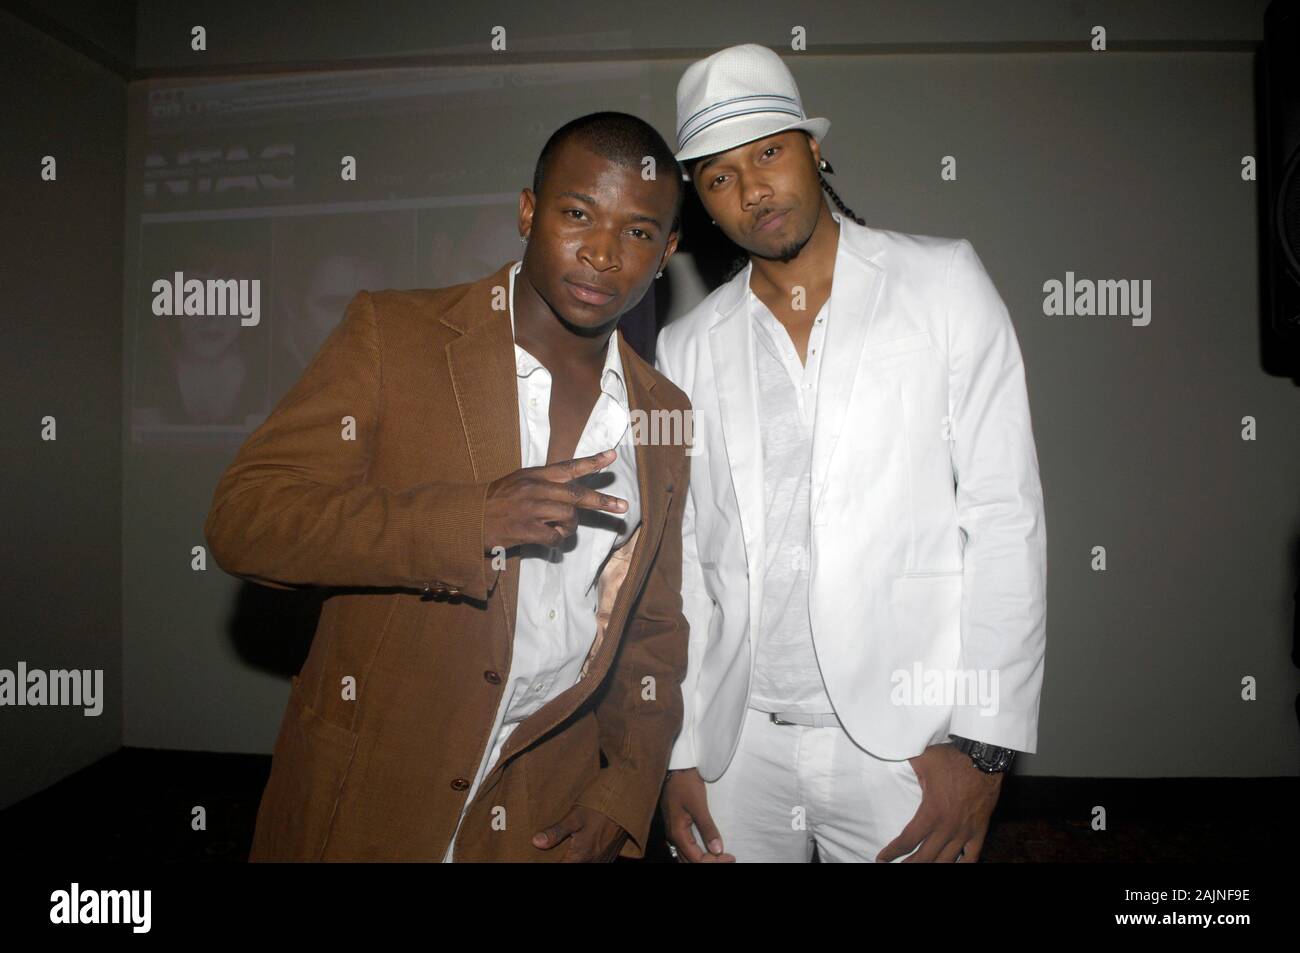 Rapper O.T. Genasis (l) at the Norwood Talent Agency Corporation (NTAC) Grand Opening at the Hollywood Roosevelt Hotel on May 10, 2011 in Los Angeles. Stock Photo